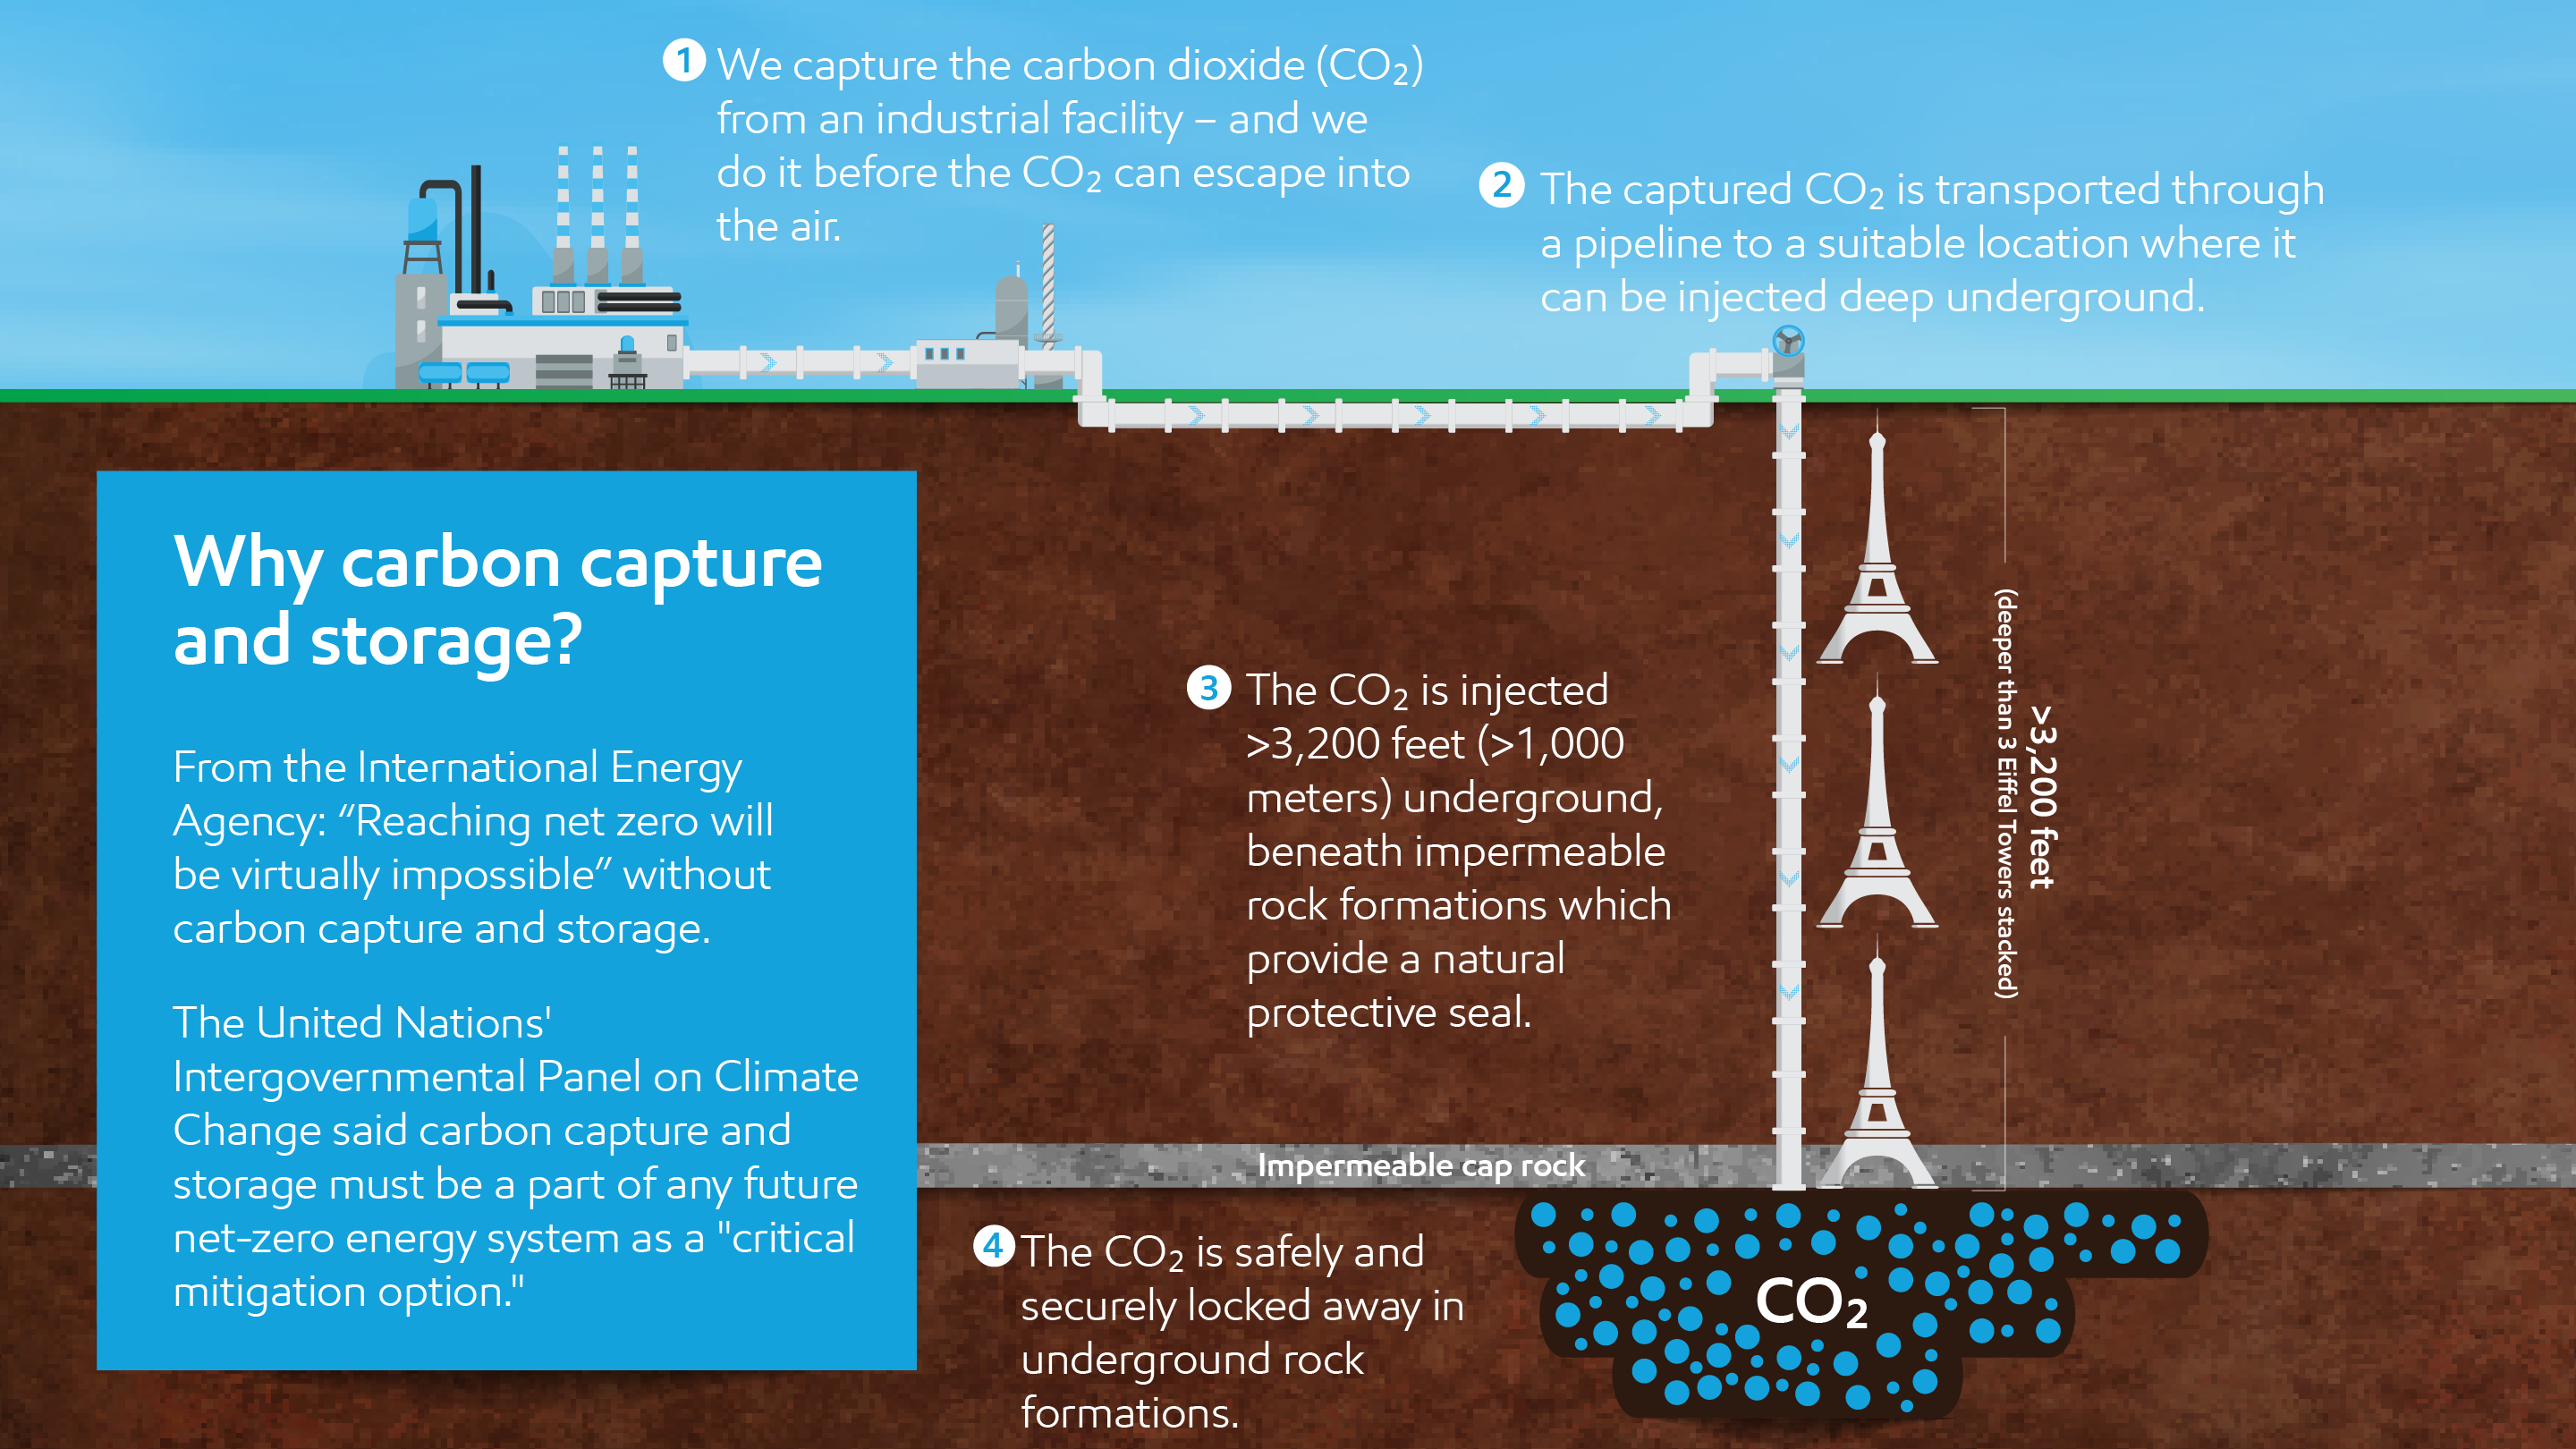 Image ExxonMobil is a global leader in carbon capture and storage